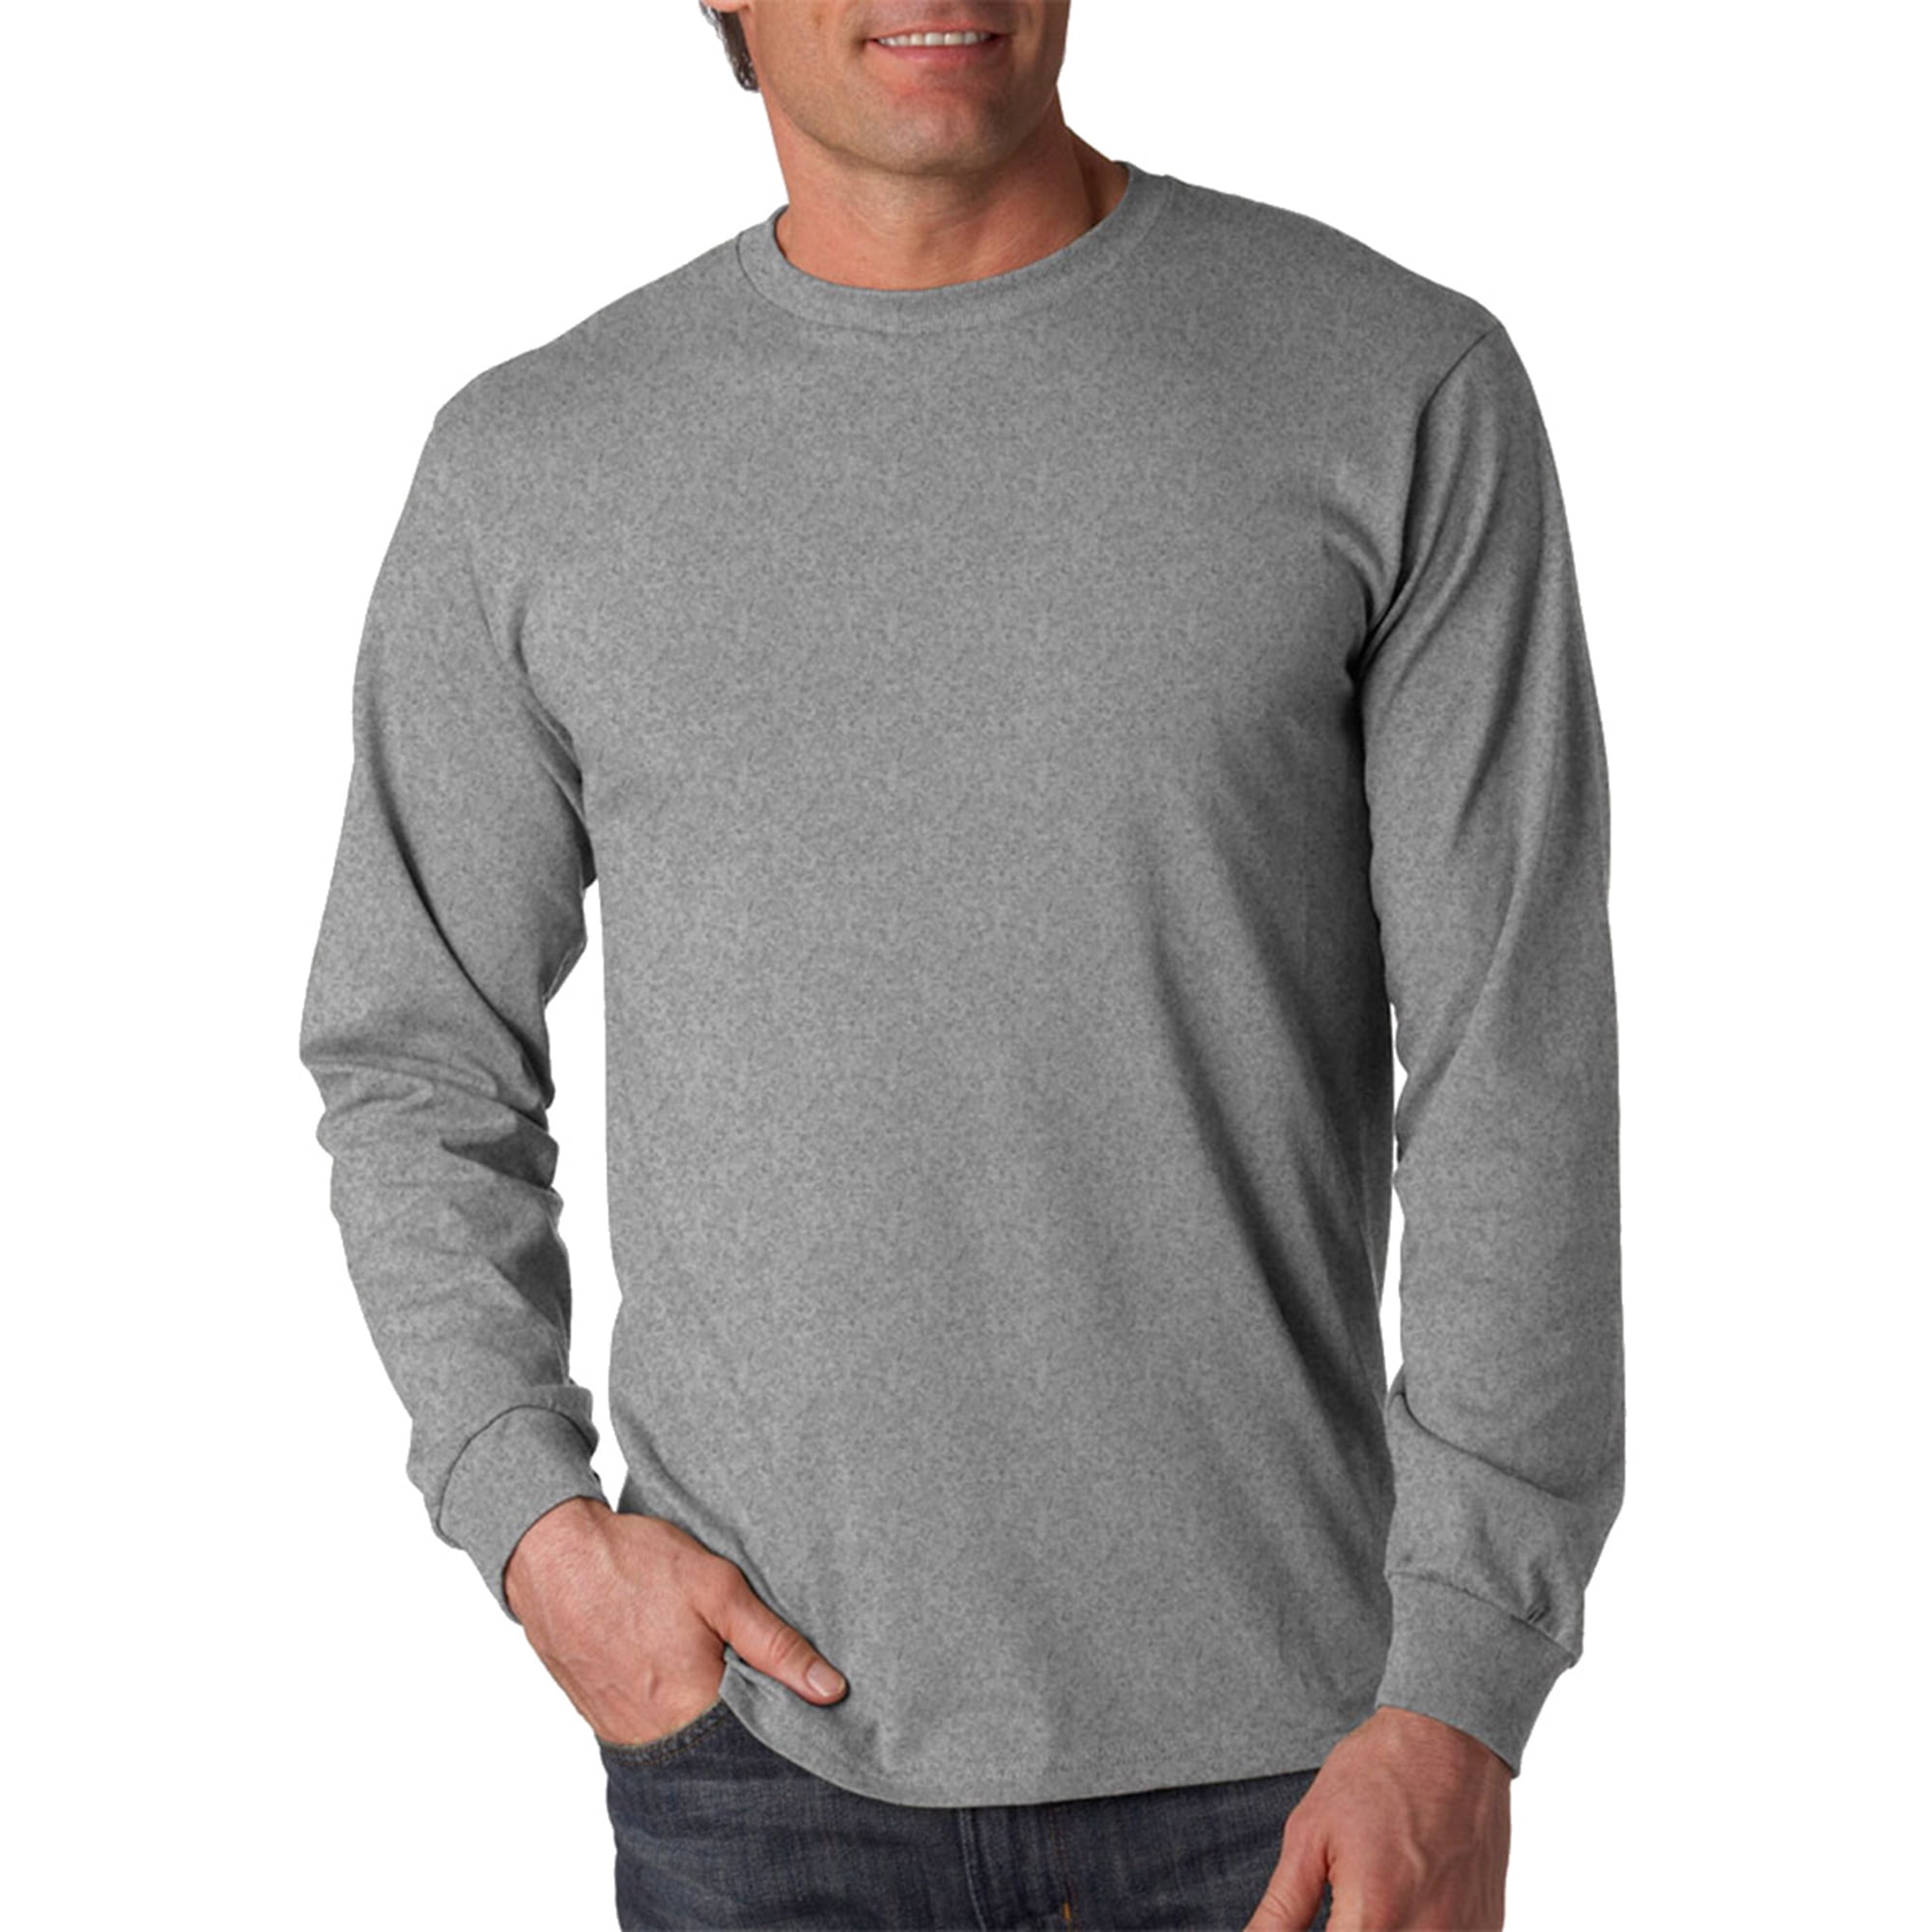 Fruit of the Loom - Fruit of the Loom Boys 6-20 HD Cotton Long Sleeve T ...